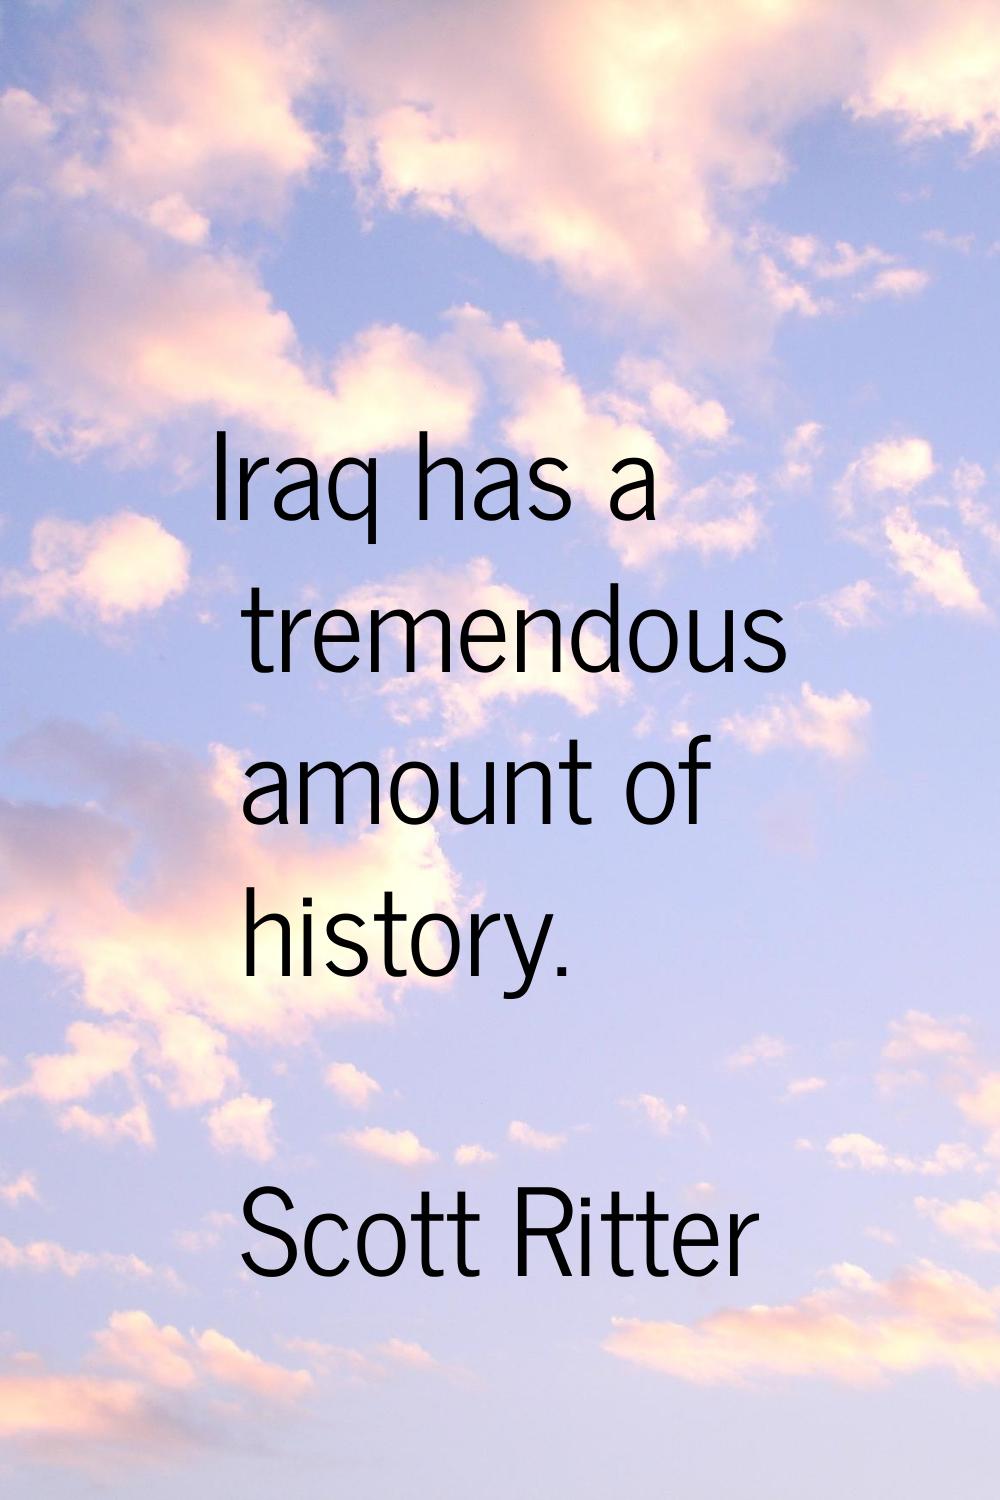 Iraq has a tremendous amount of history.